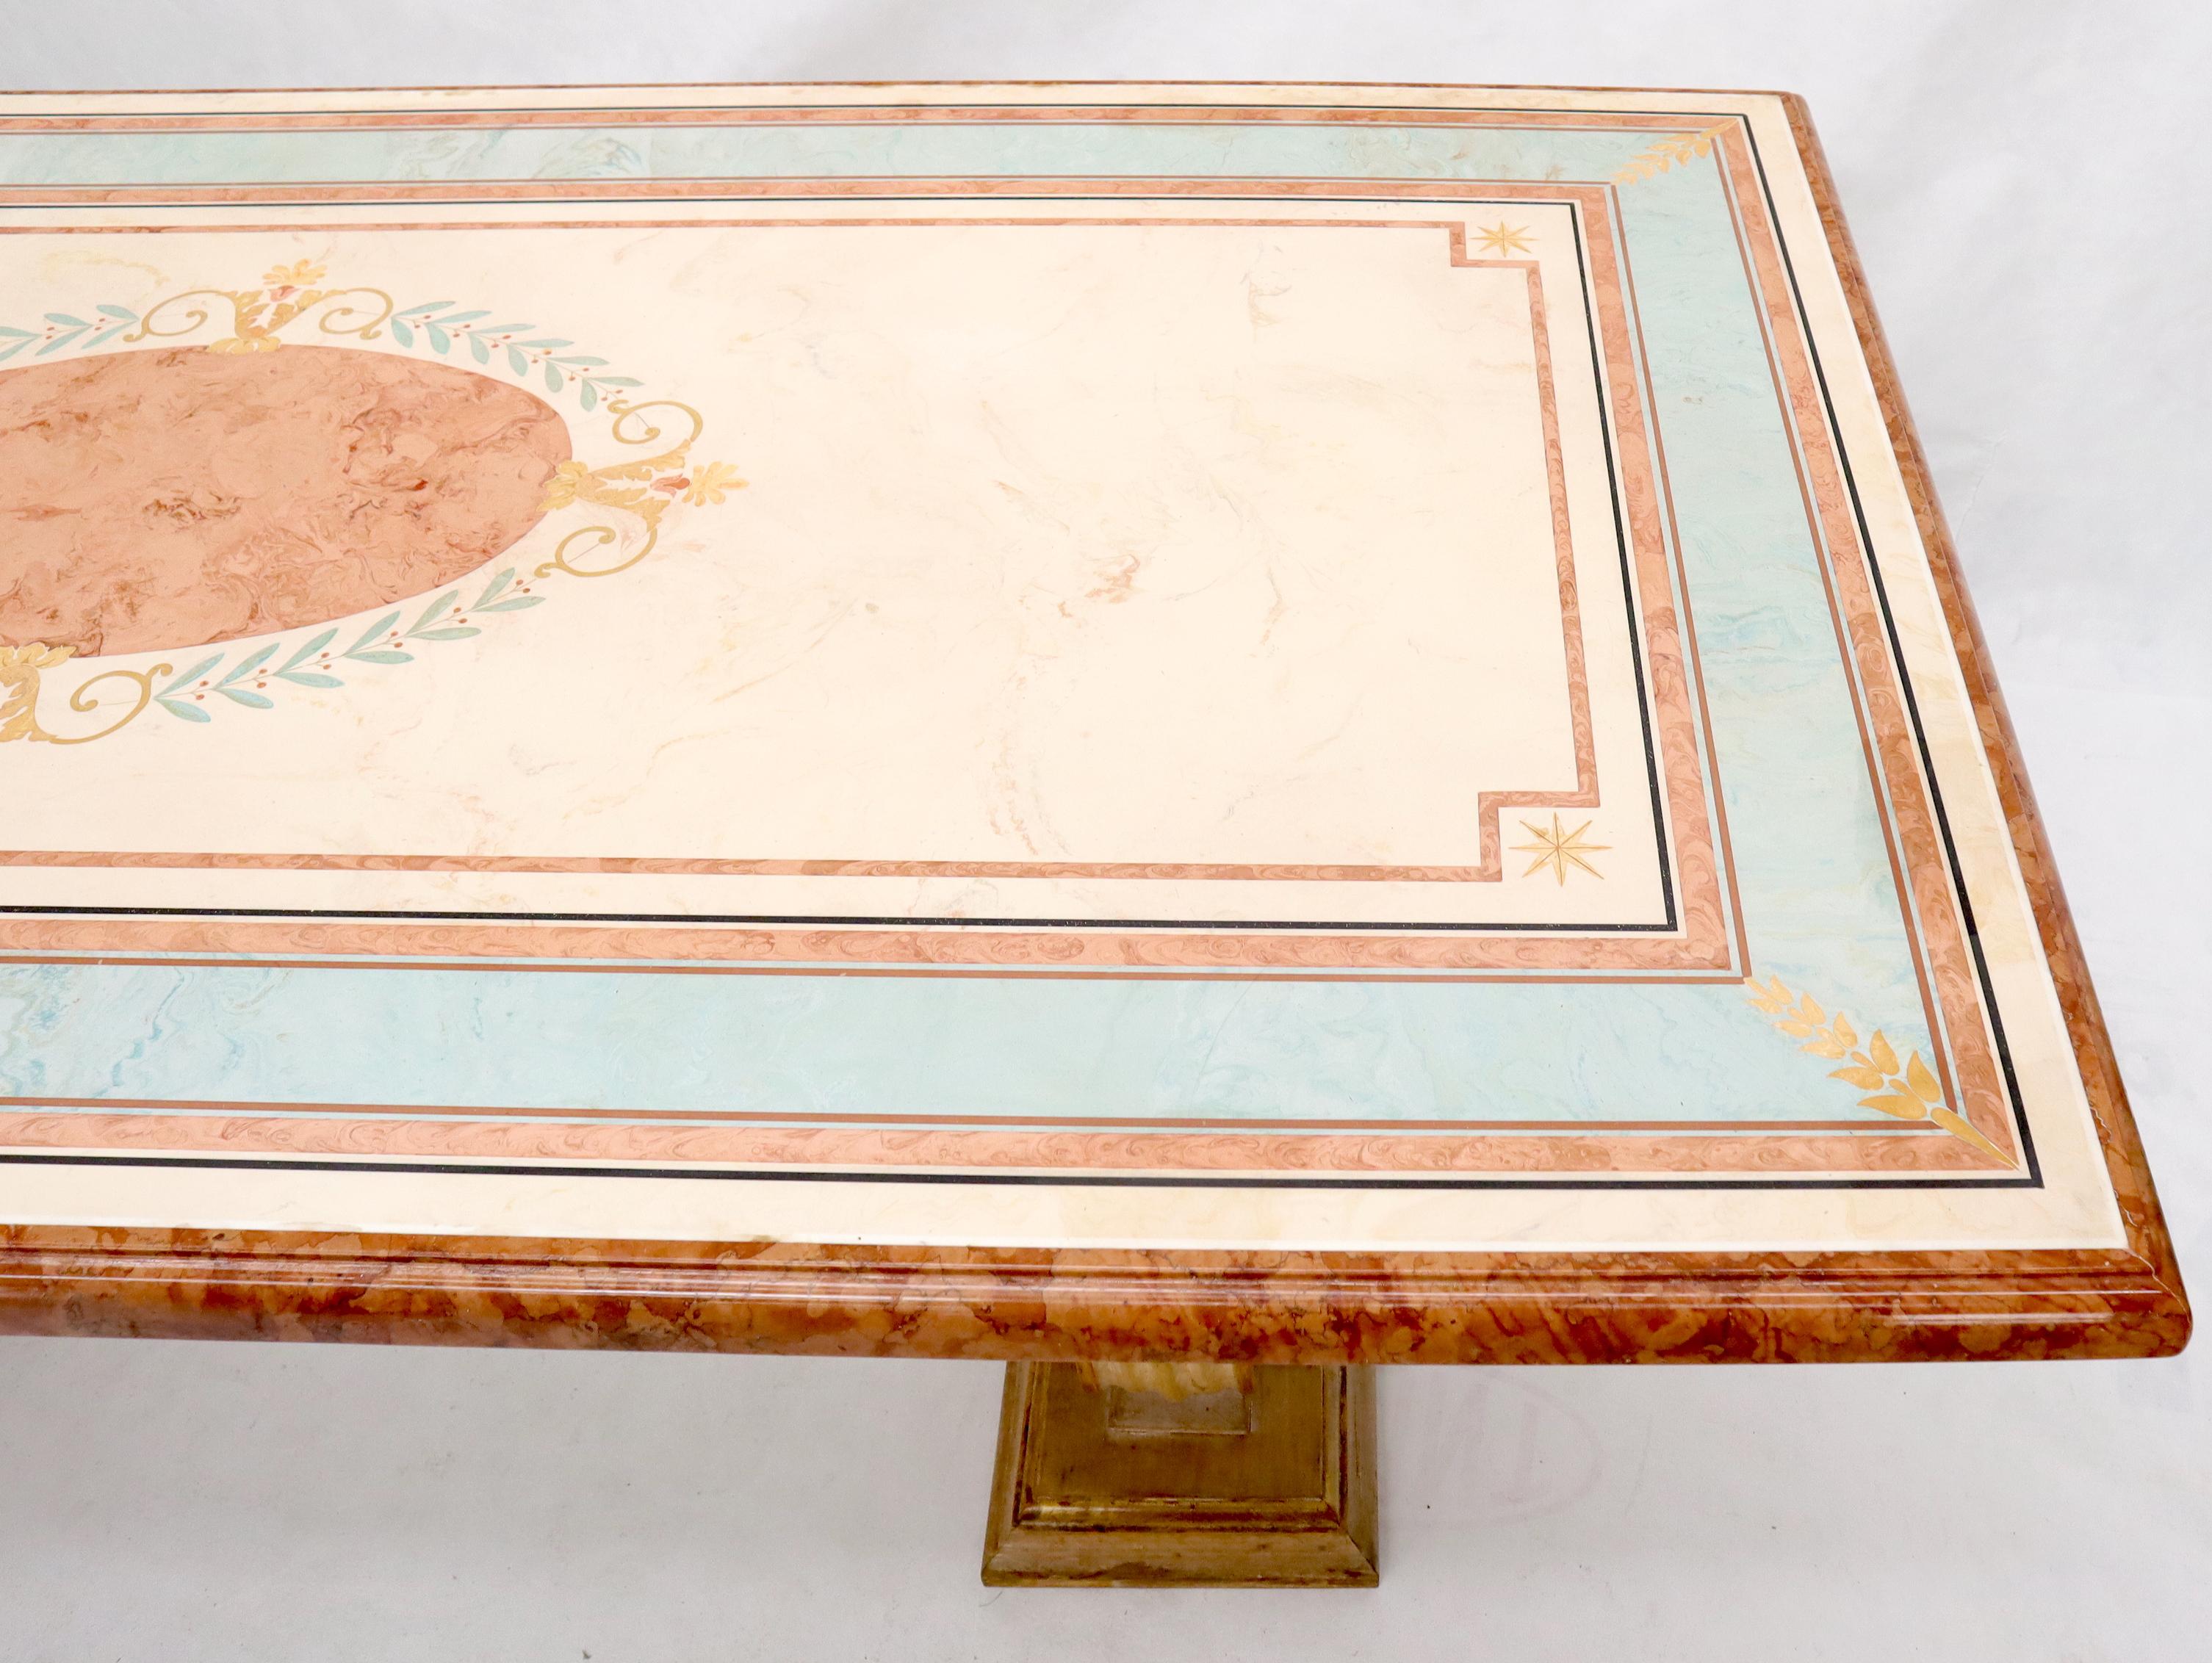 20th Century Enamel Decorated Marble Top Dining Table on Carved Gold Lyre Shape Pedestals For Sale